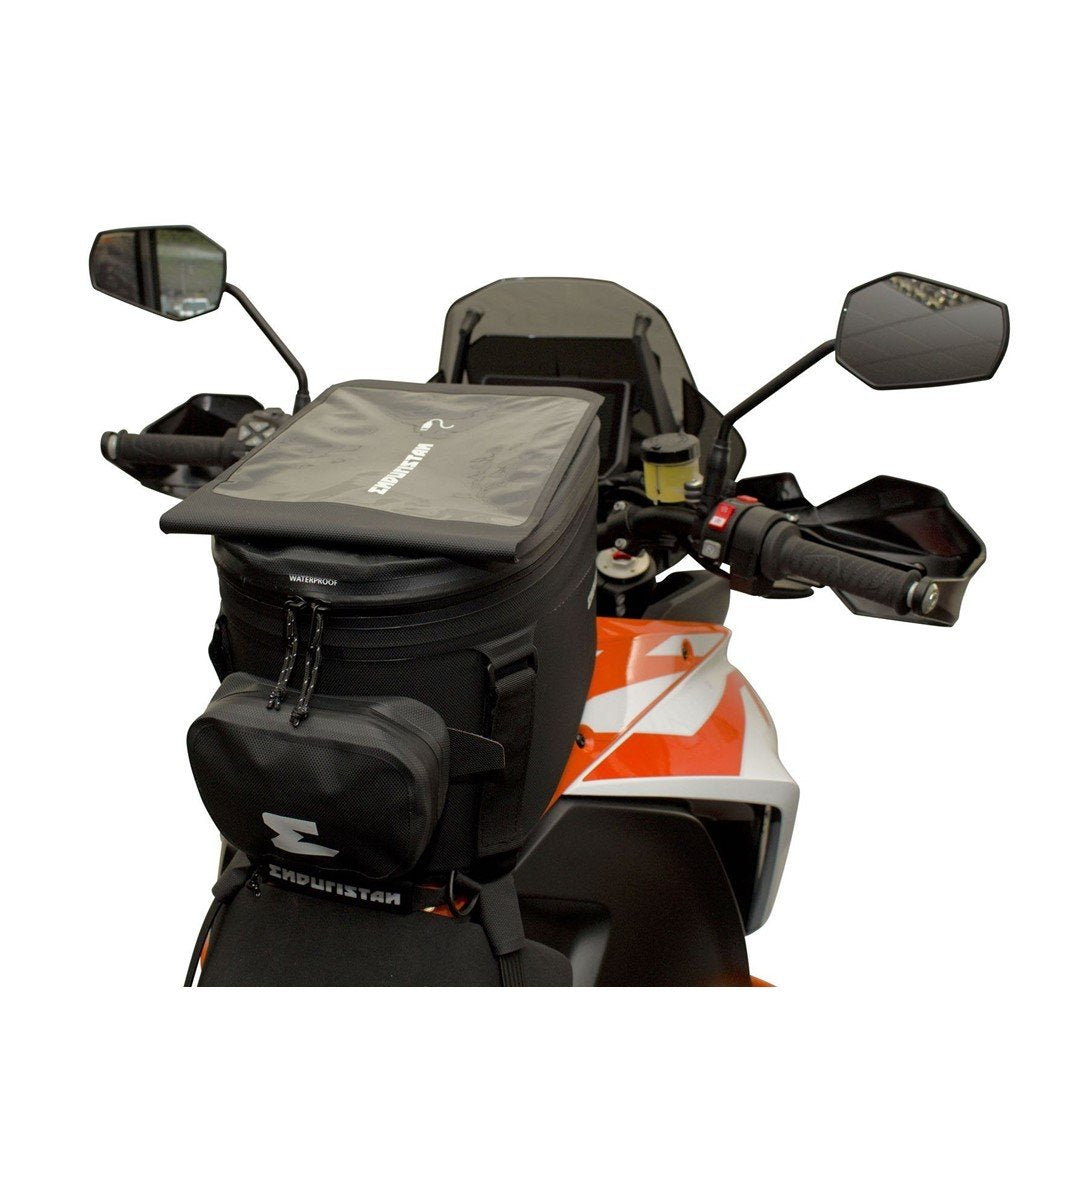 SANDSTORM 4A TANK BAG, LUTA-007, enduristan, luggage, sandstorm, tank bags, waterproof, Tank Bags - Imported and distributed in North & South America by Lindeco Genuine Powersports - Premier Powersports Equipment and Accessories for Motorcycle Enthusiasts, Professional Riders and Dealers.